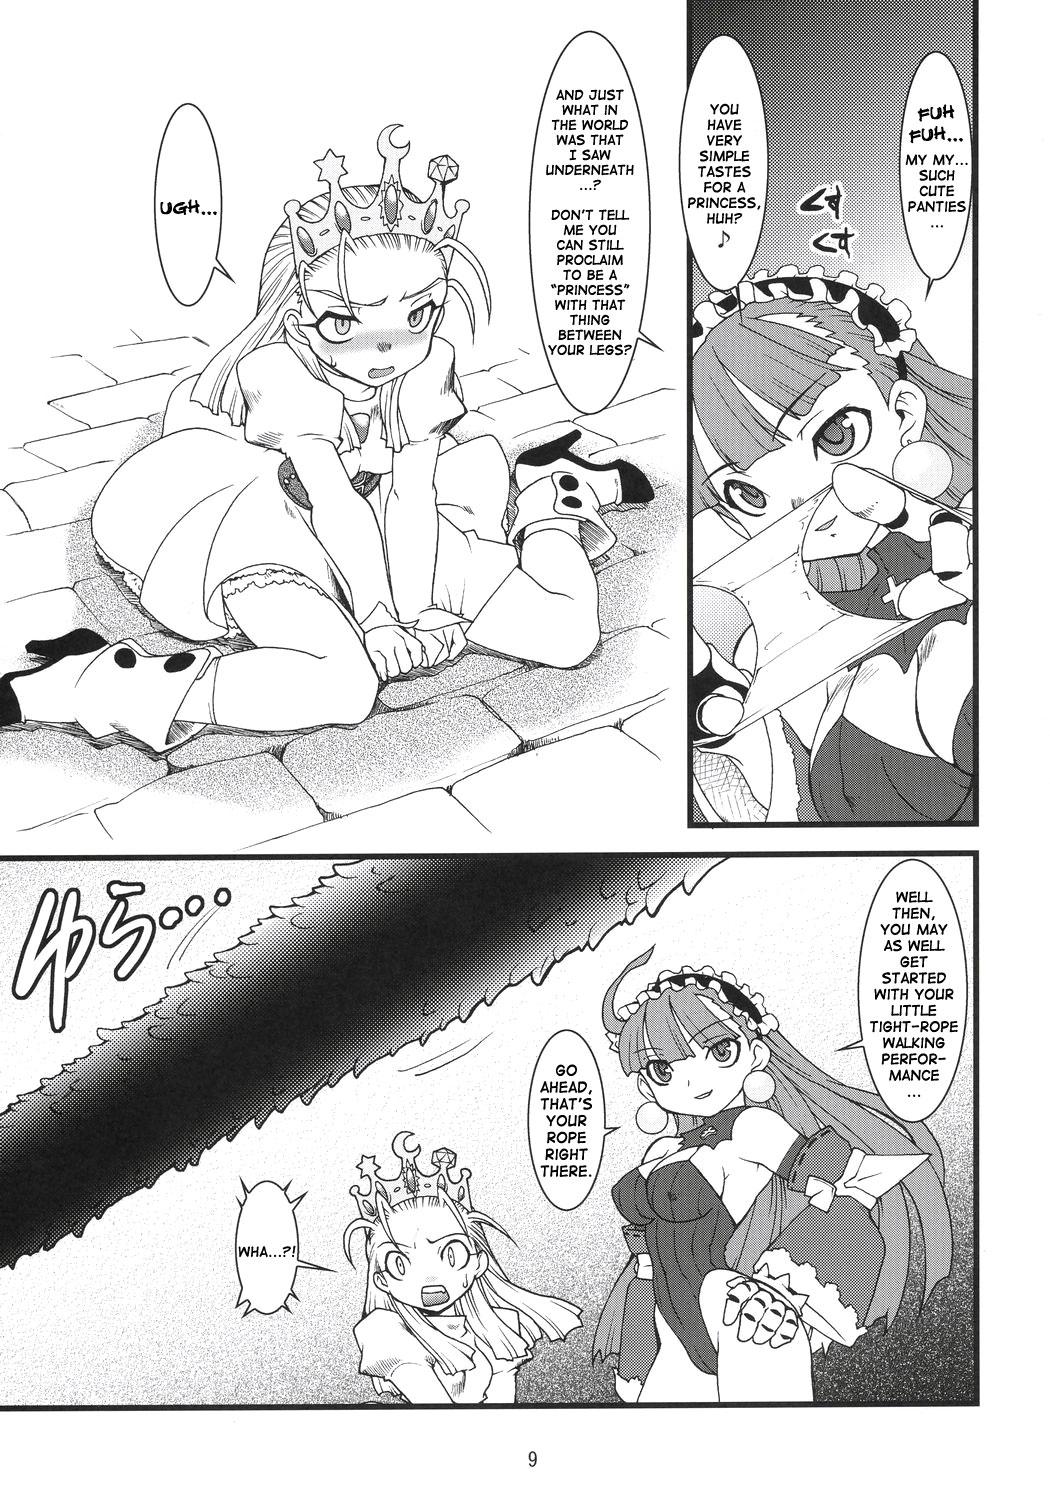 Hugetits Royal Standard 2 - Cyberbots La pucelle Ex Girlfriends - Page 8